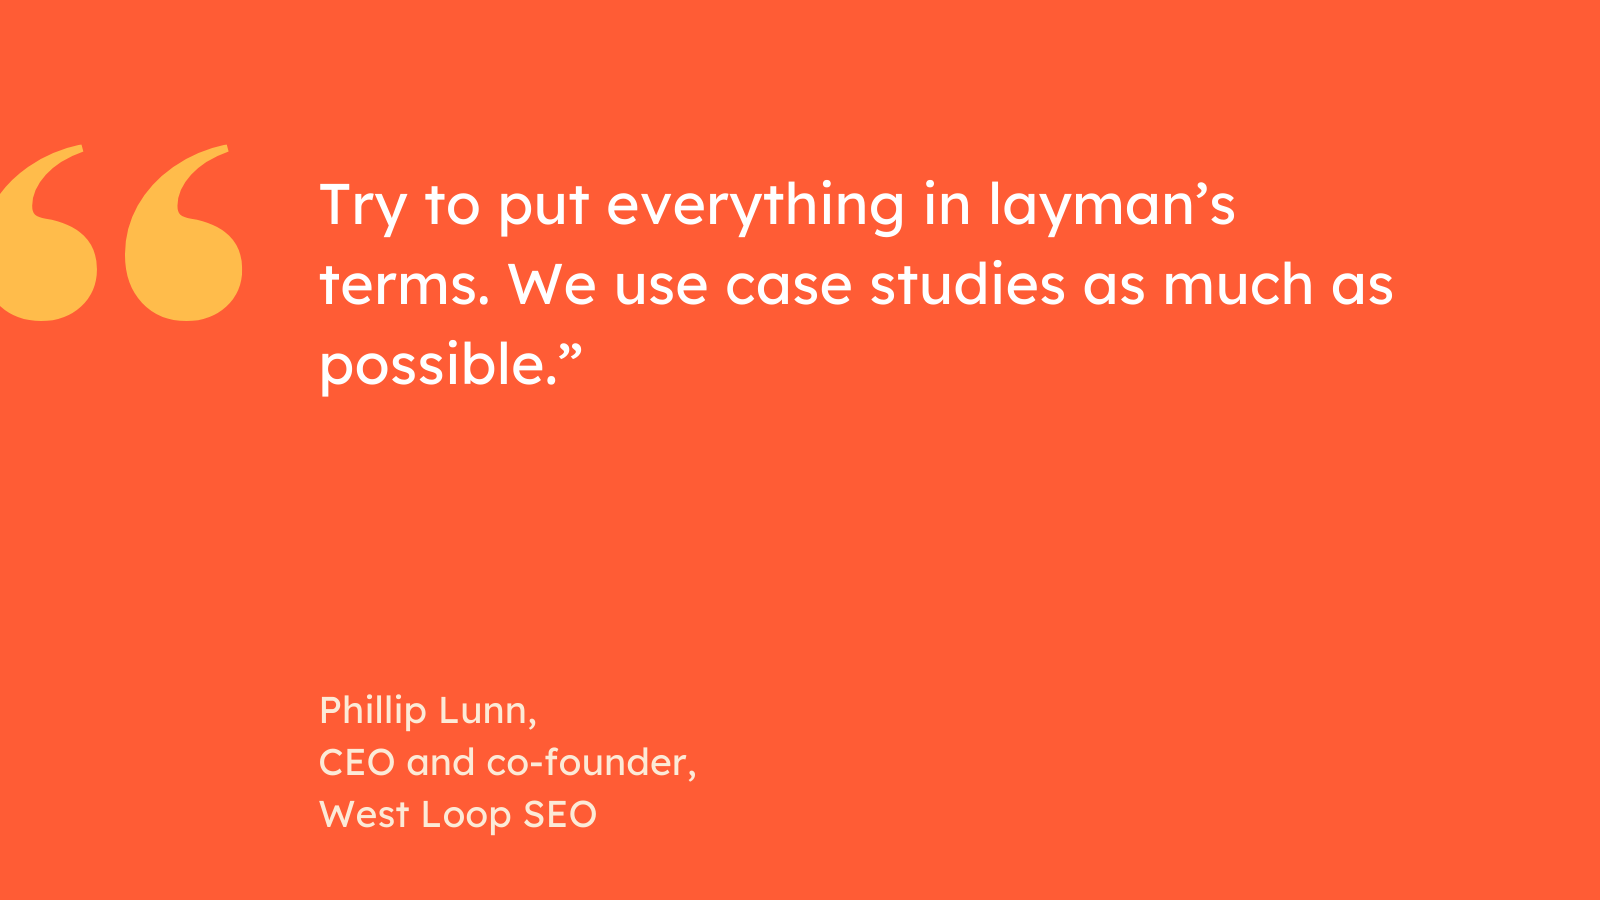 “Try to put everything in layman’s terms. We use case studies as much as possible.” Phillip Lunn, CEO and co-founder, West Loop SEO